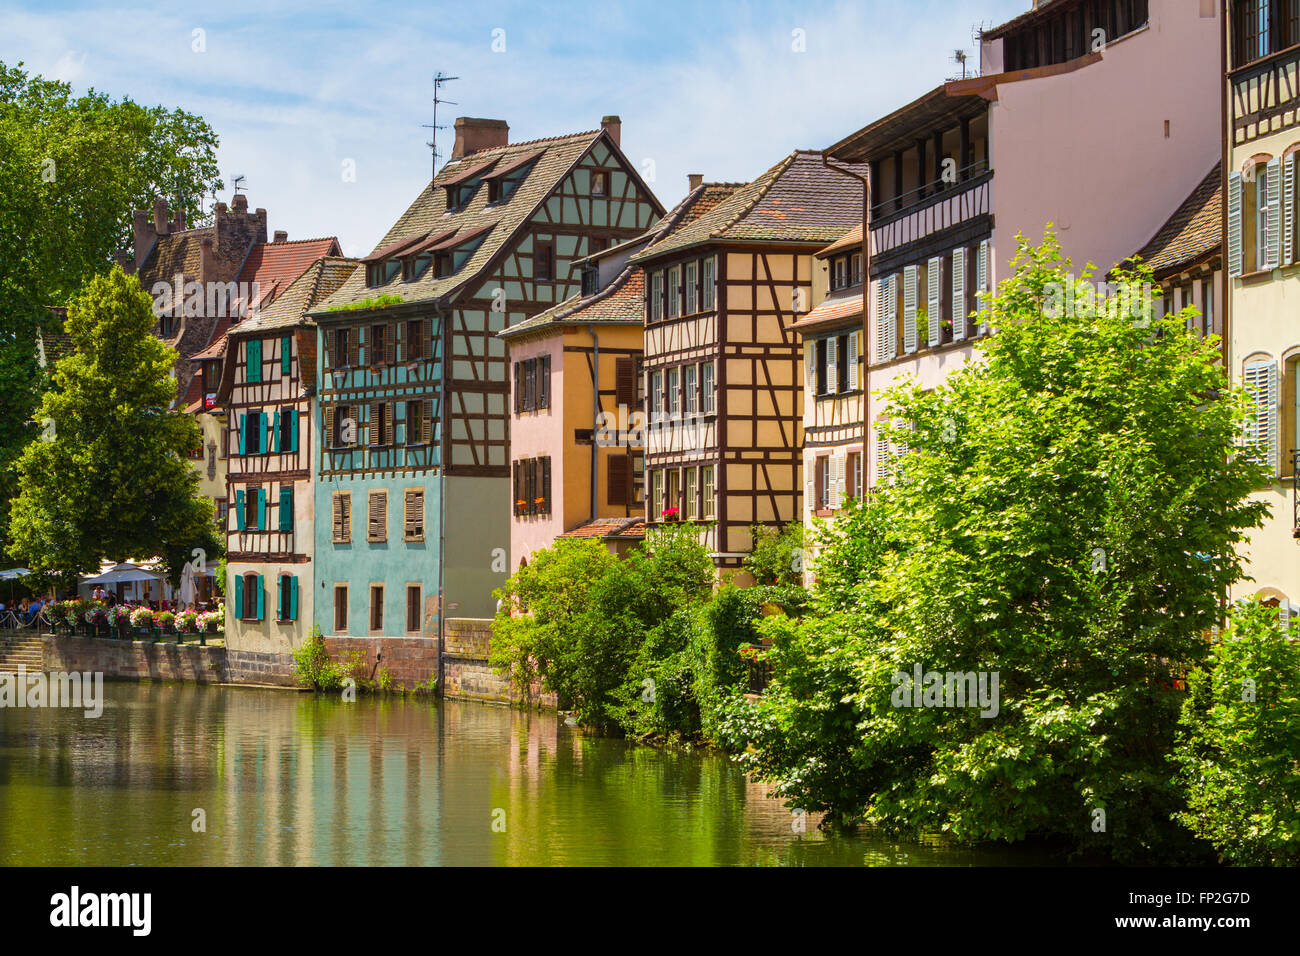 Half-timbered houses along the River Ill in the Petite France Strasbourg, Alsace, France Stock Photo